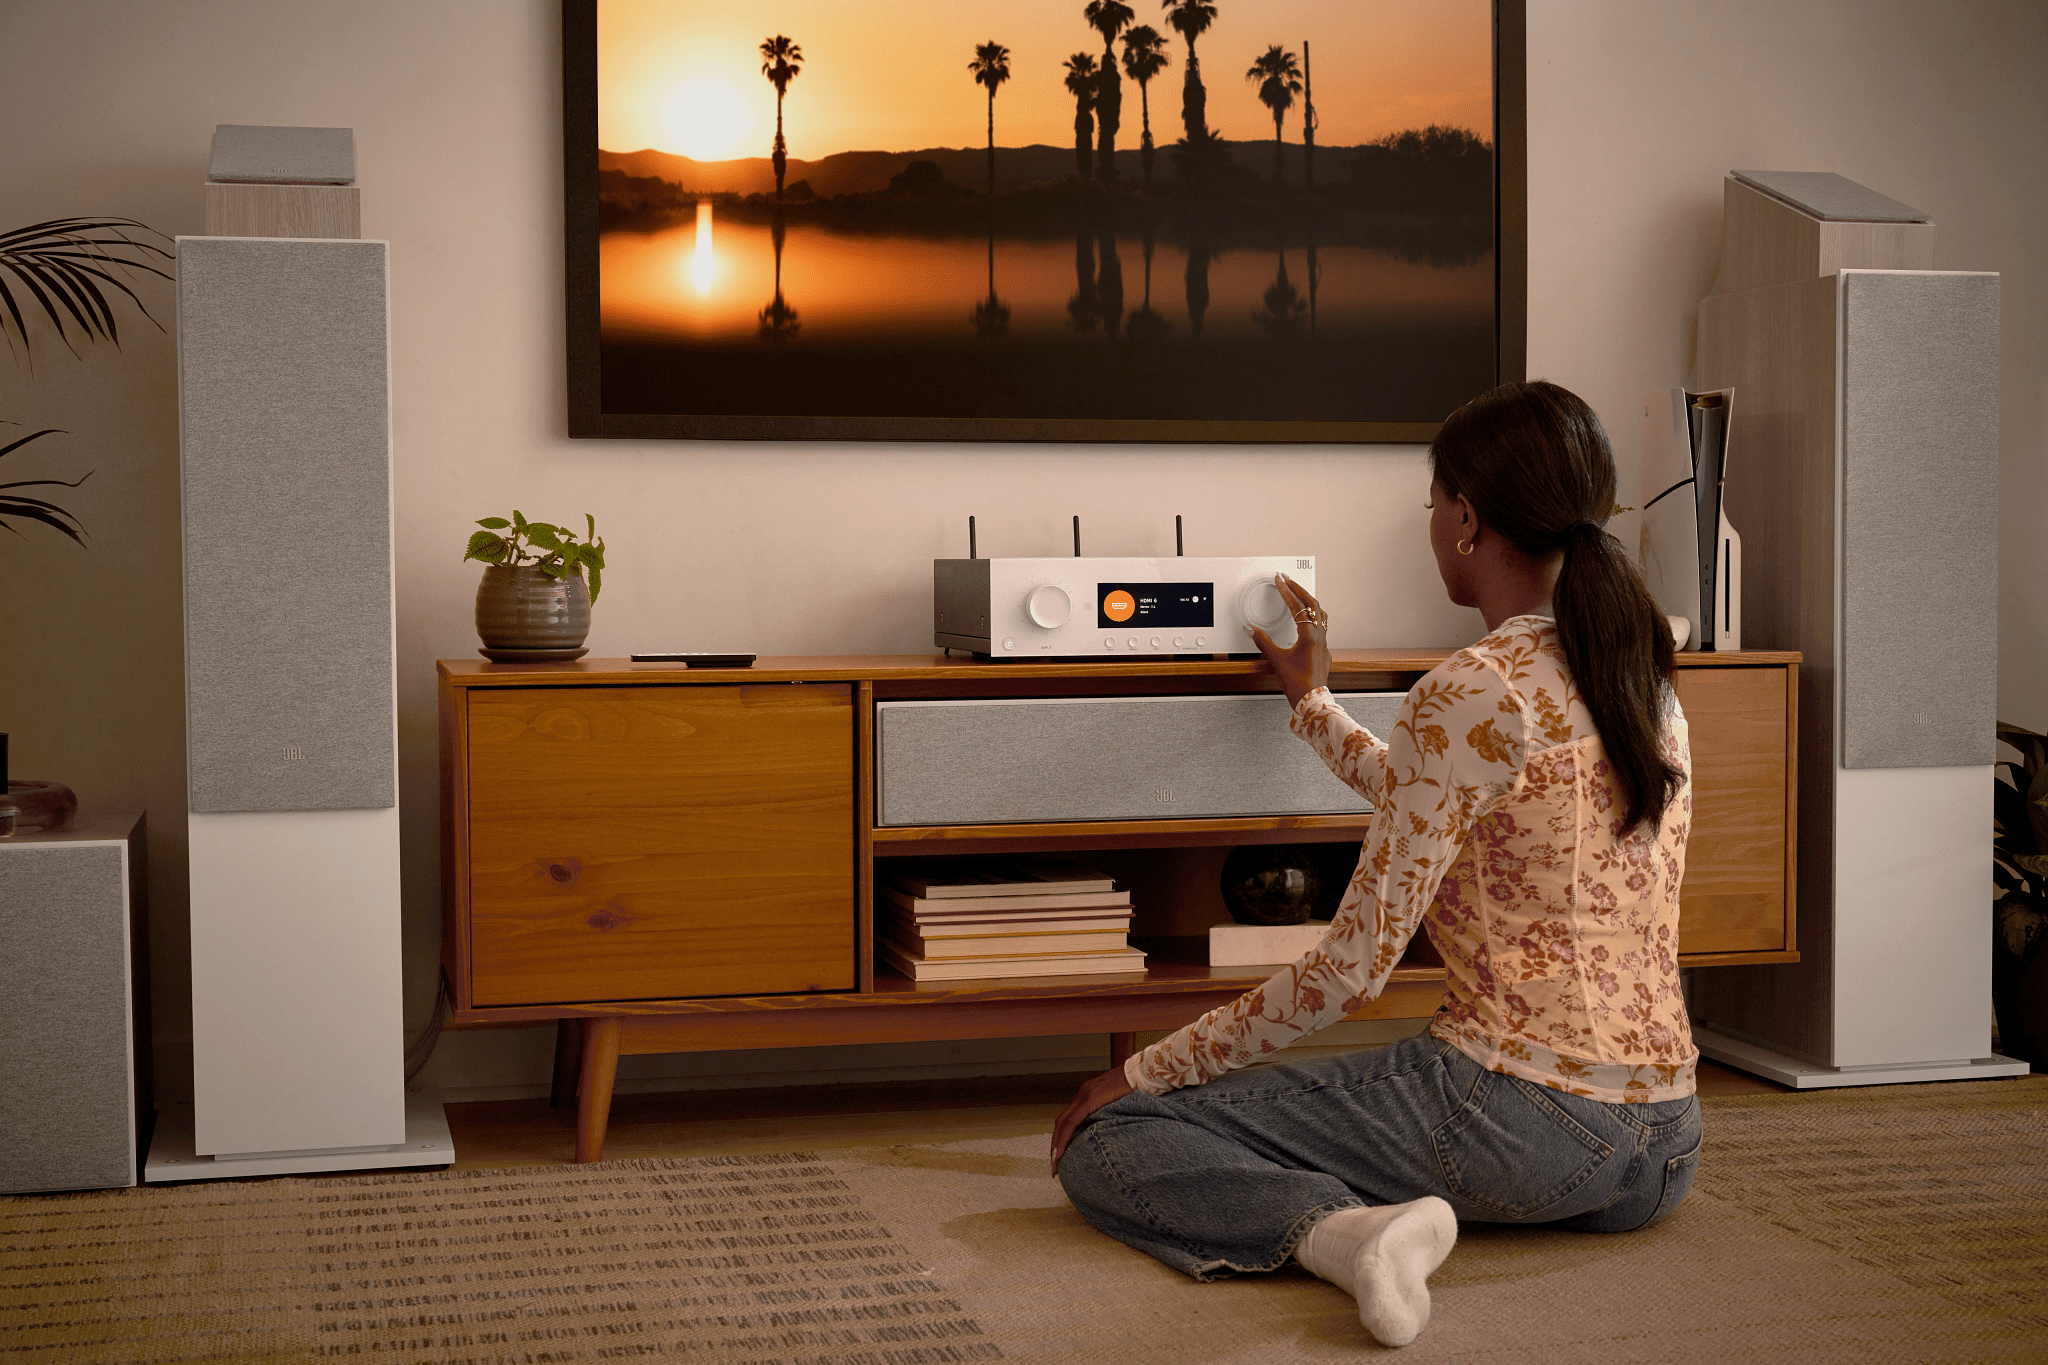 JBL sets up the Stage 2: With the new series you can easily put together a modern home theater setup